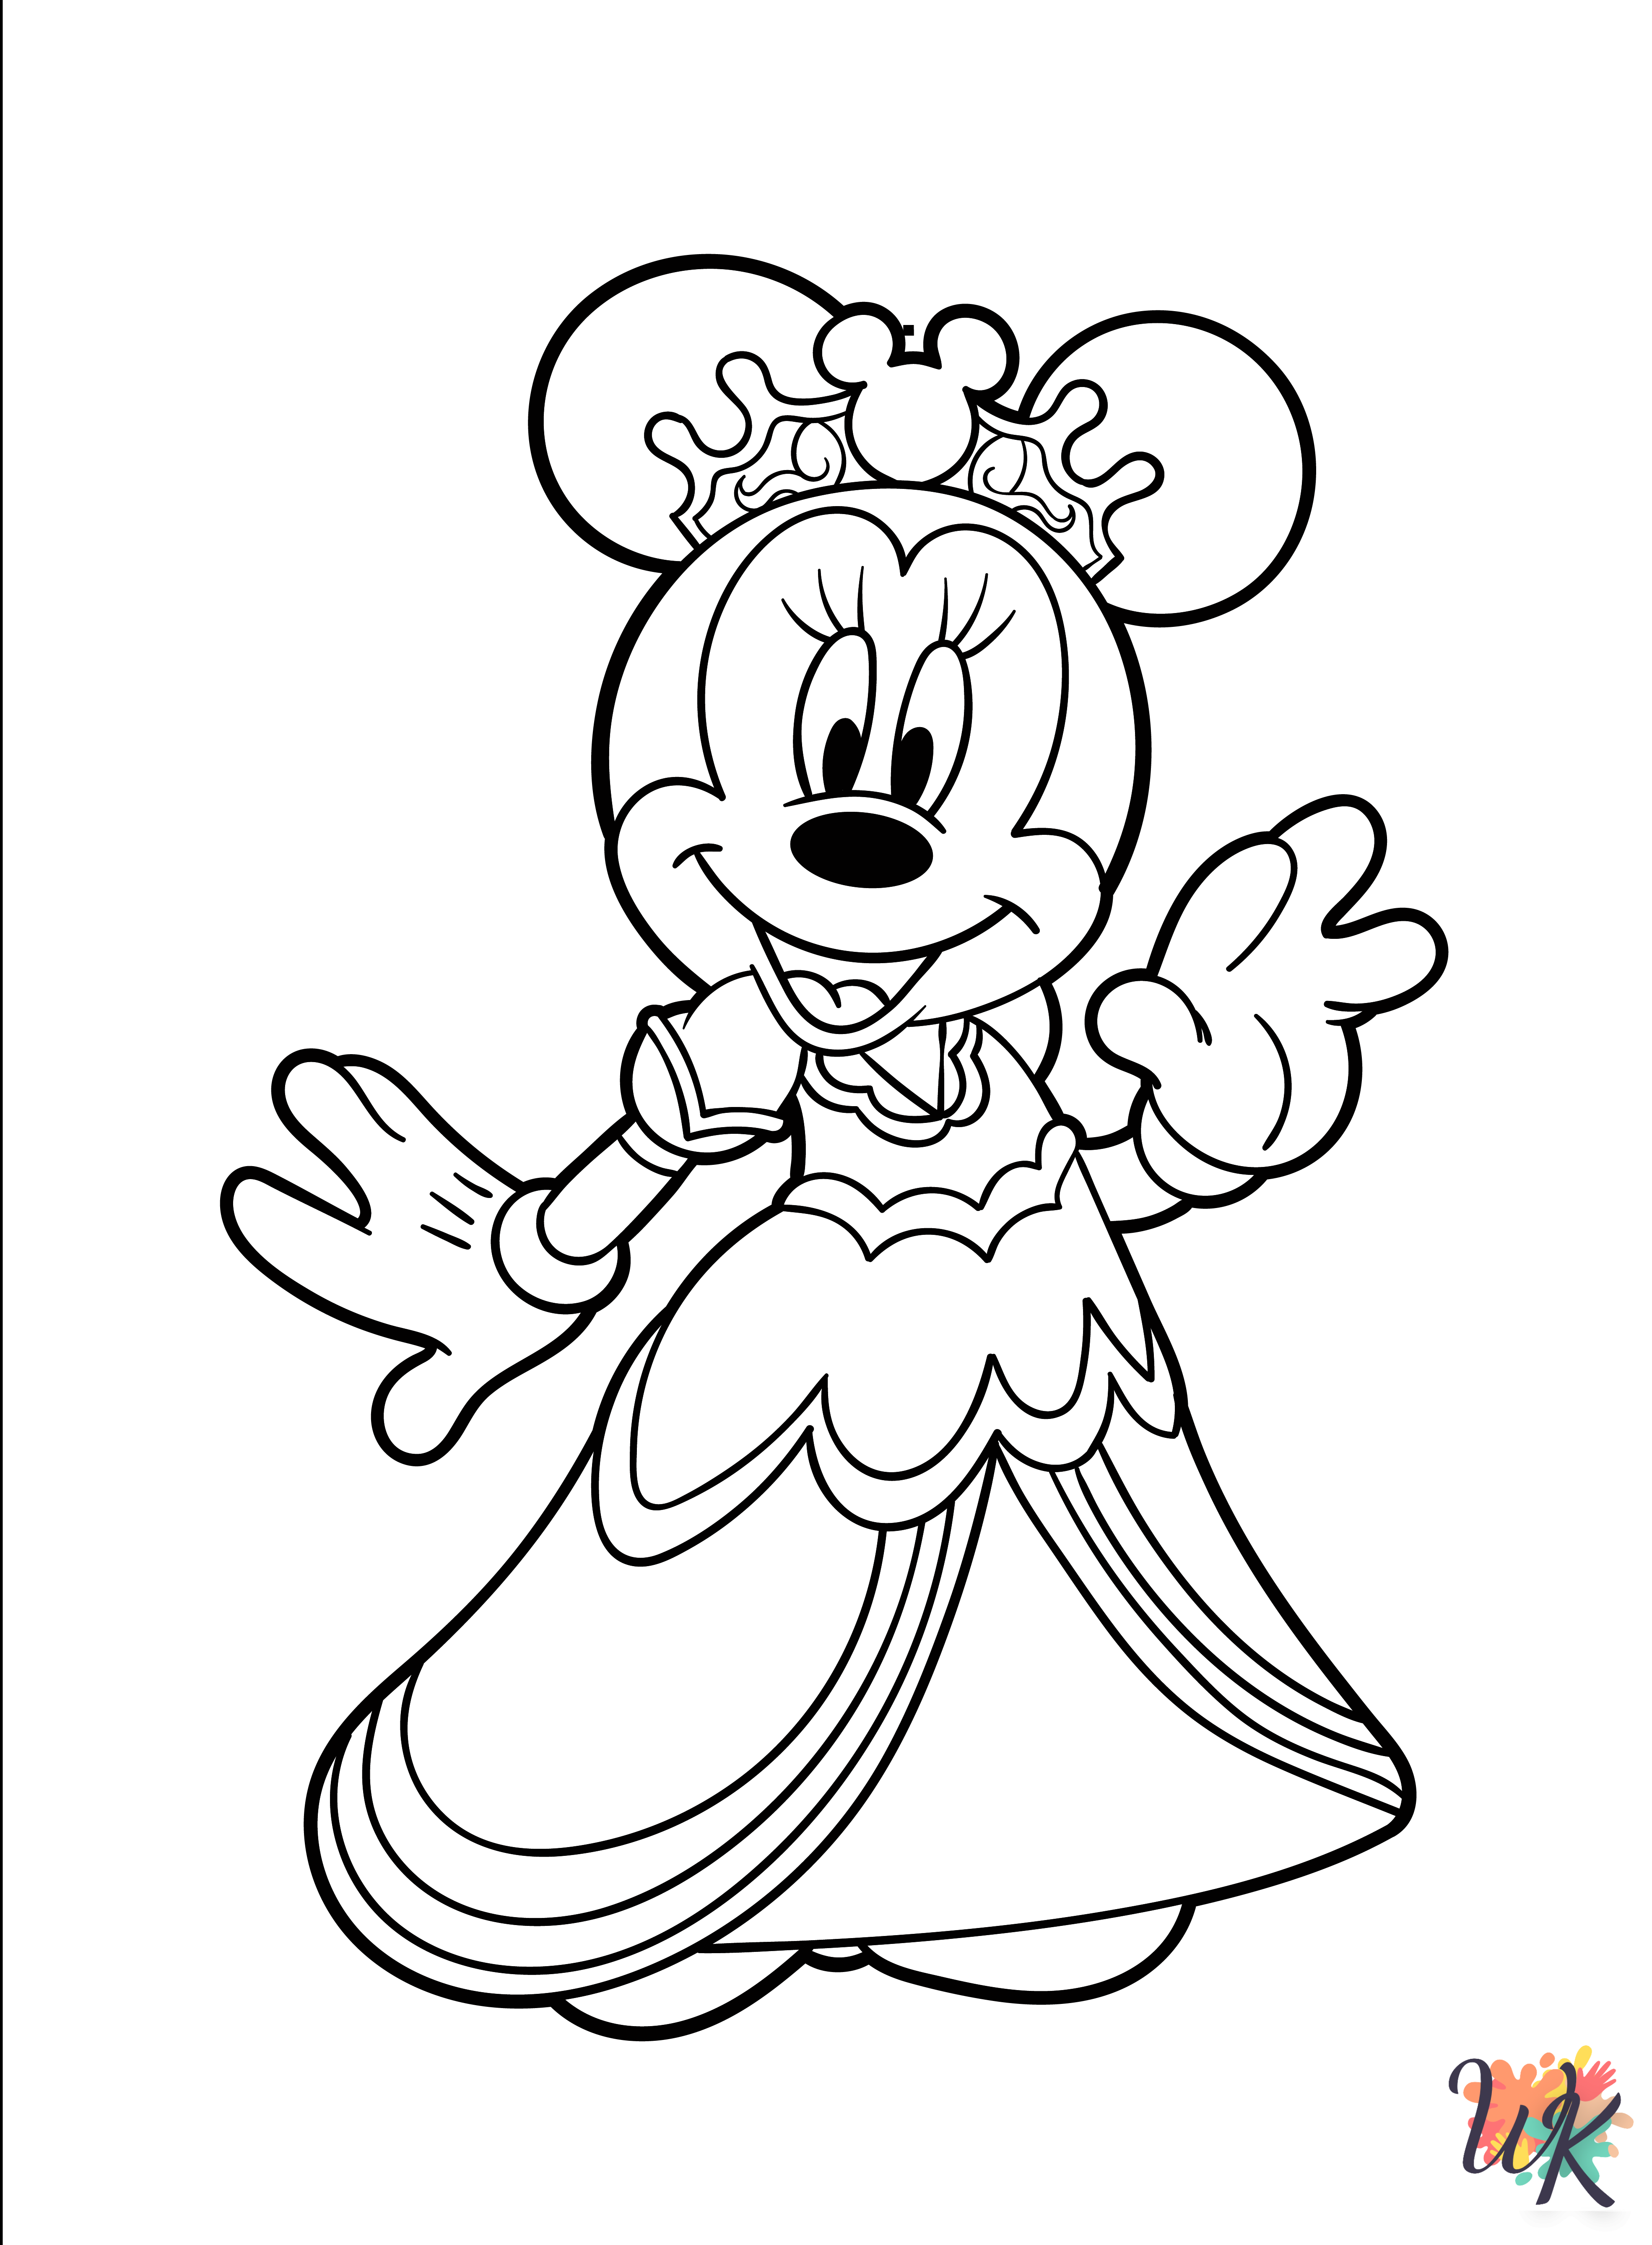 printable Minnie Mouse coloring pages for adults